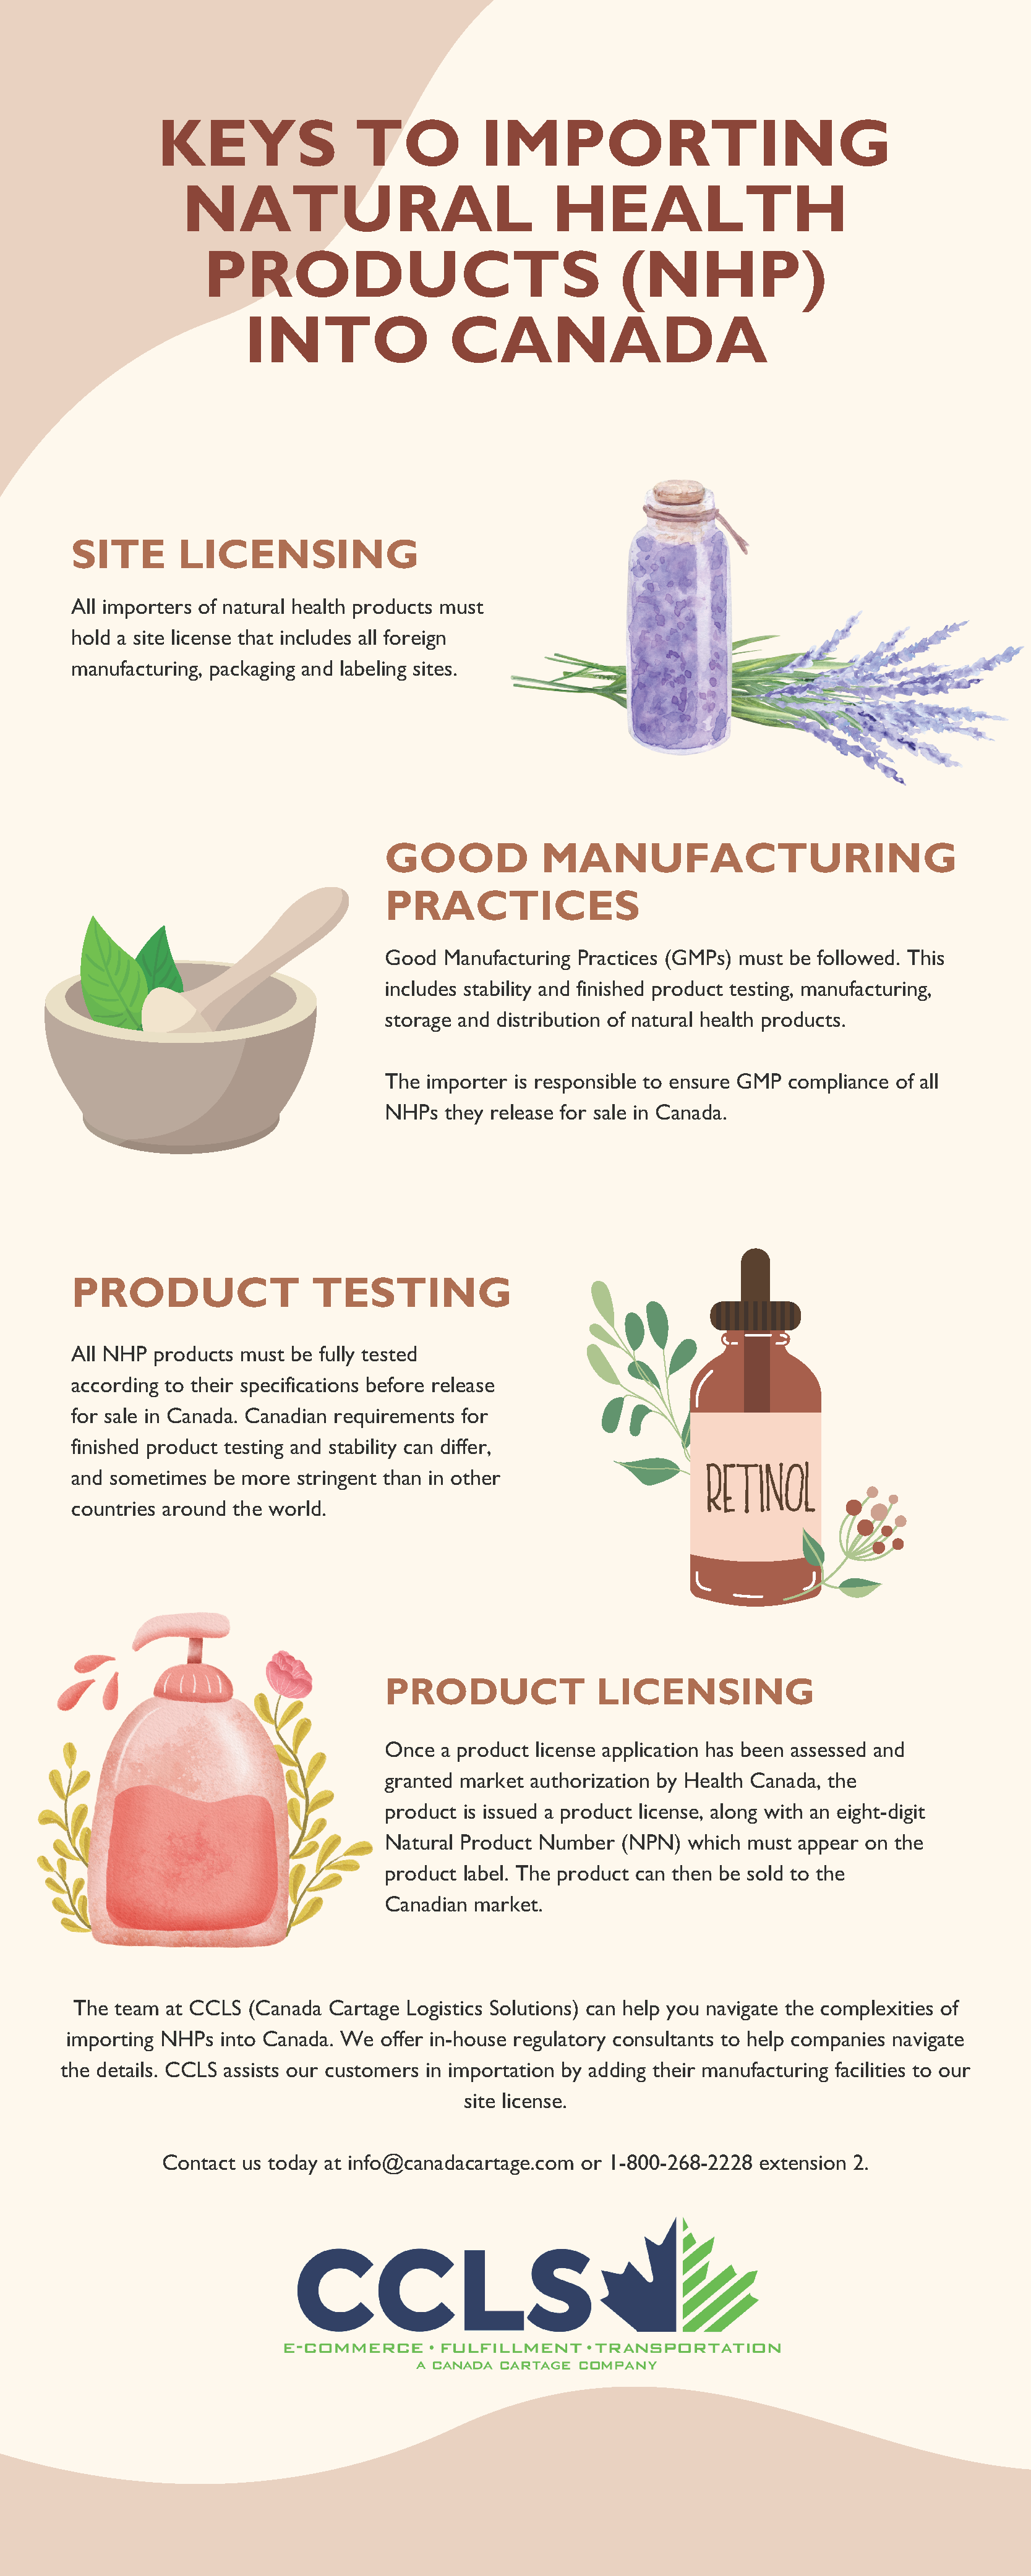 Keys to Importing Natural Health Products Into Canada